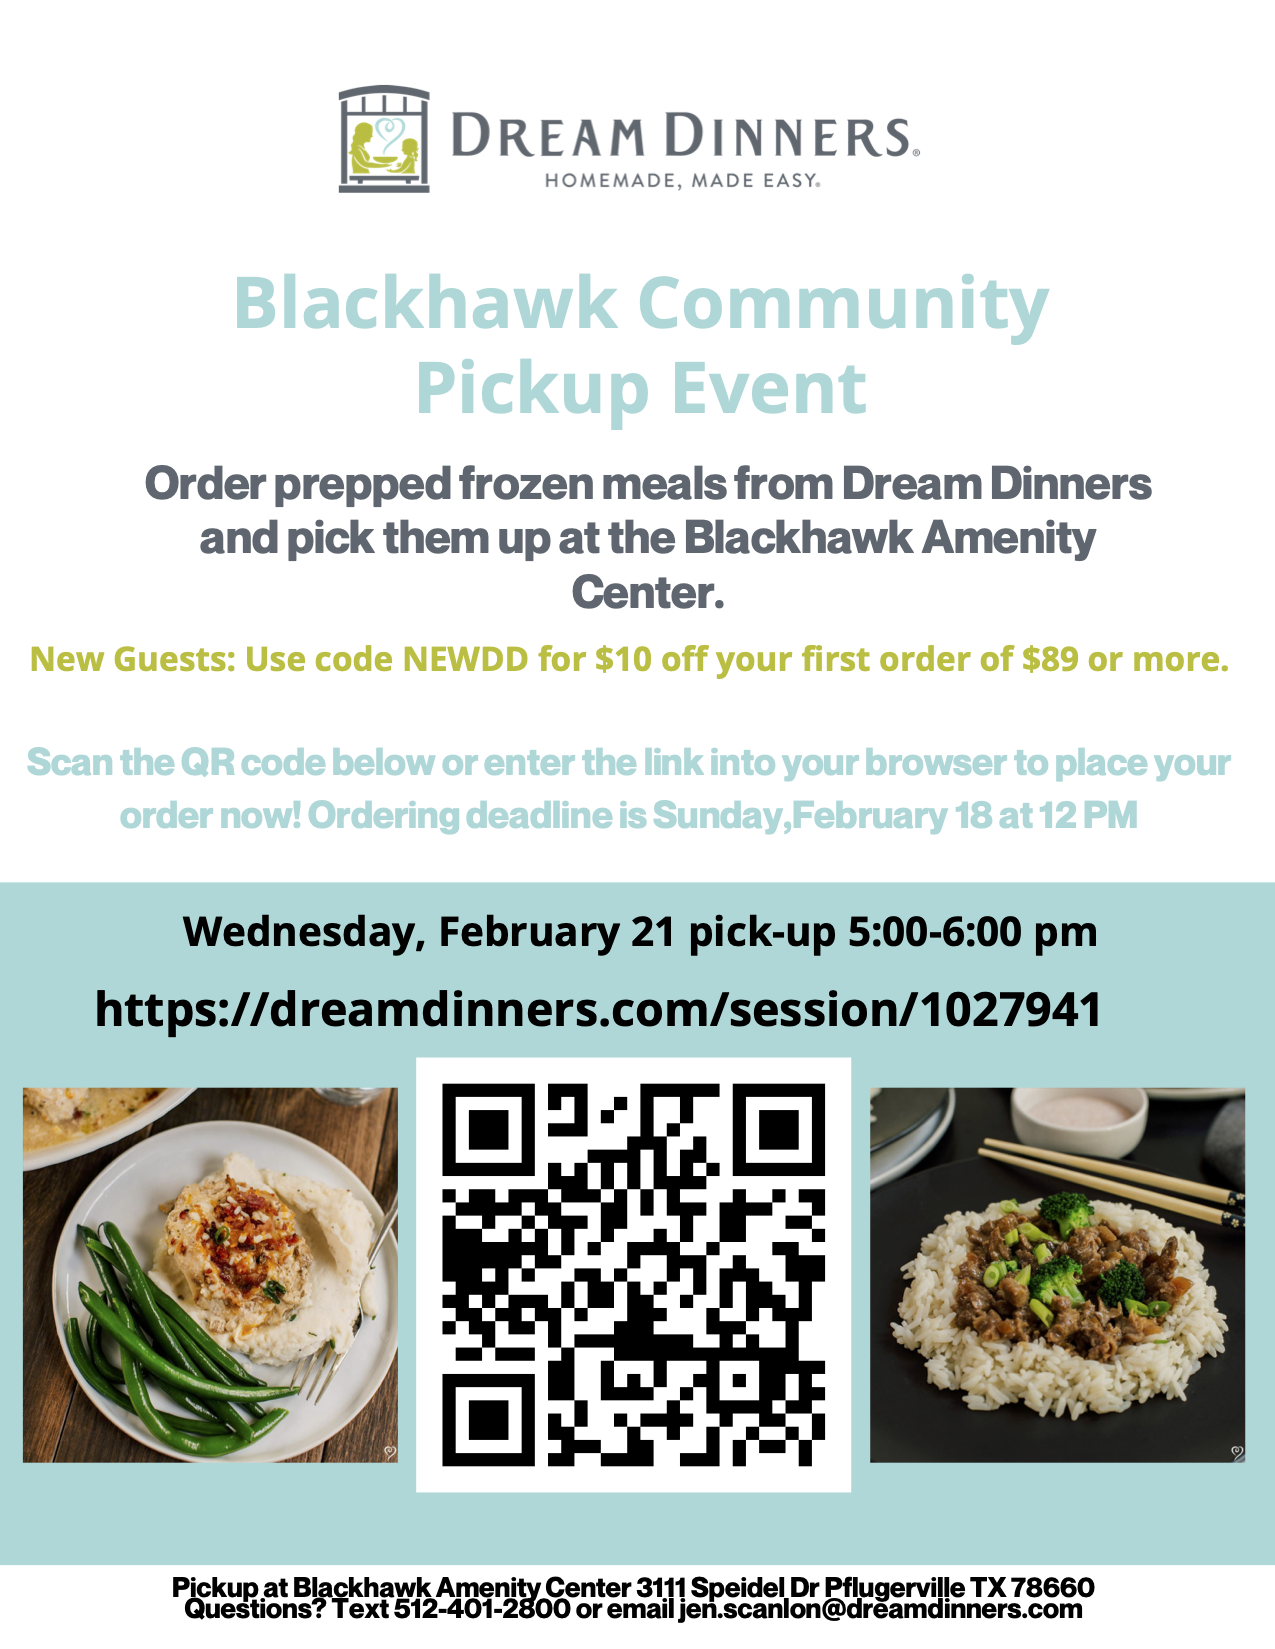 A promotional flyer for a Dream Dinners Blackhawk Community Pickup Event. The flyer is in shades of teal, black, and white with images of prepared meals at the bottom. It features the Dream Dinners logo at the top and details about ordering prepped frozen meals for pickup at the Blackhawk Amenity Center. There's a QR code to scan, a link for placing orders, and a special offer for new guests. The pickup date is listed as Wednesday, February 21, from 5:00-6:00 pm. Contact information and the pickup address in Pflugerville, Texas, are provided at the bottom.